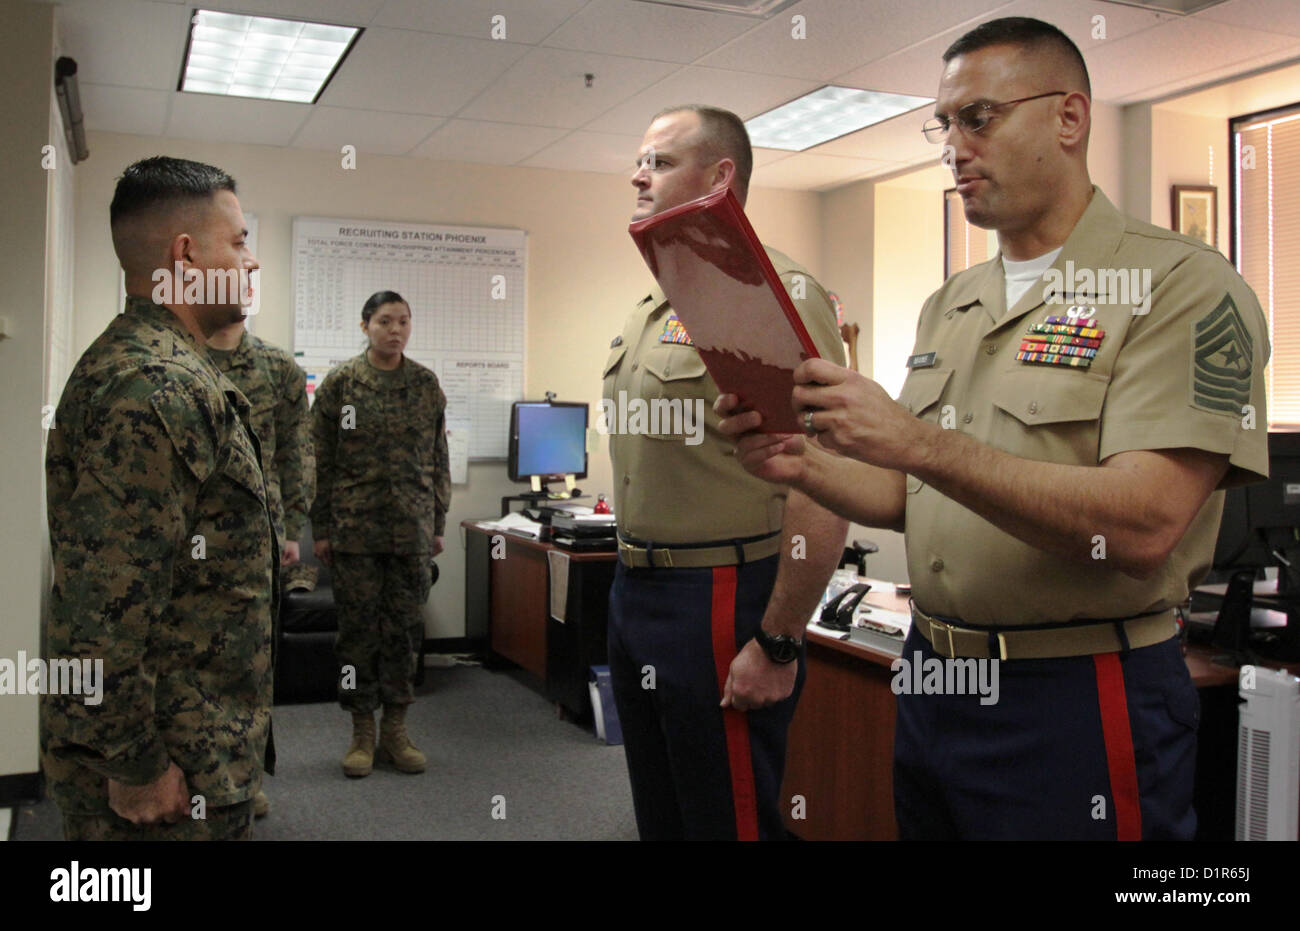 Sgt. Maj. Wallace M. Mains, sergeant major of Marine Corps Recruiting Station Phoenix, reads a promotion warrant for then Staff Sgt. Roque Palmerinvega, left, promoted to the next rank of gunnery sergeant, during a ceremony at the R.S. Phoenix Headquarters in Phoenix, Jan. 2, 2013. Palmerinvega, a native of Myton, Utah, and a light armored vehicle crewman by trade, has been a recruiter in the Phoenix region since April, 2010. 'It's a big deal and a requires a much broader sense of leadership,' Maj. Steven M. Ford, commanding officer of R.S. Phoenix, said of Palmerinvega's promotion. 'It's a qu Stock Photo